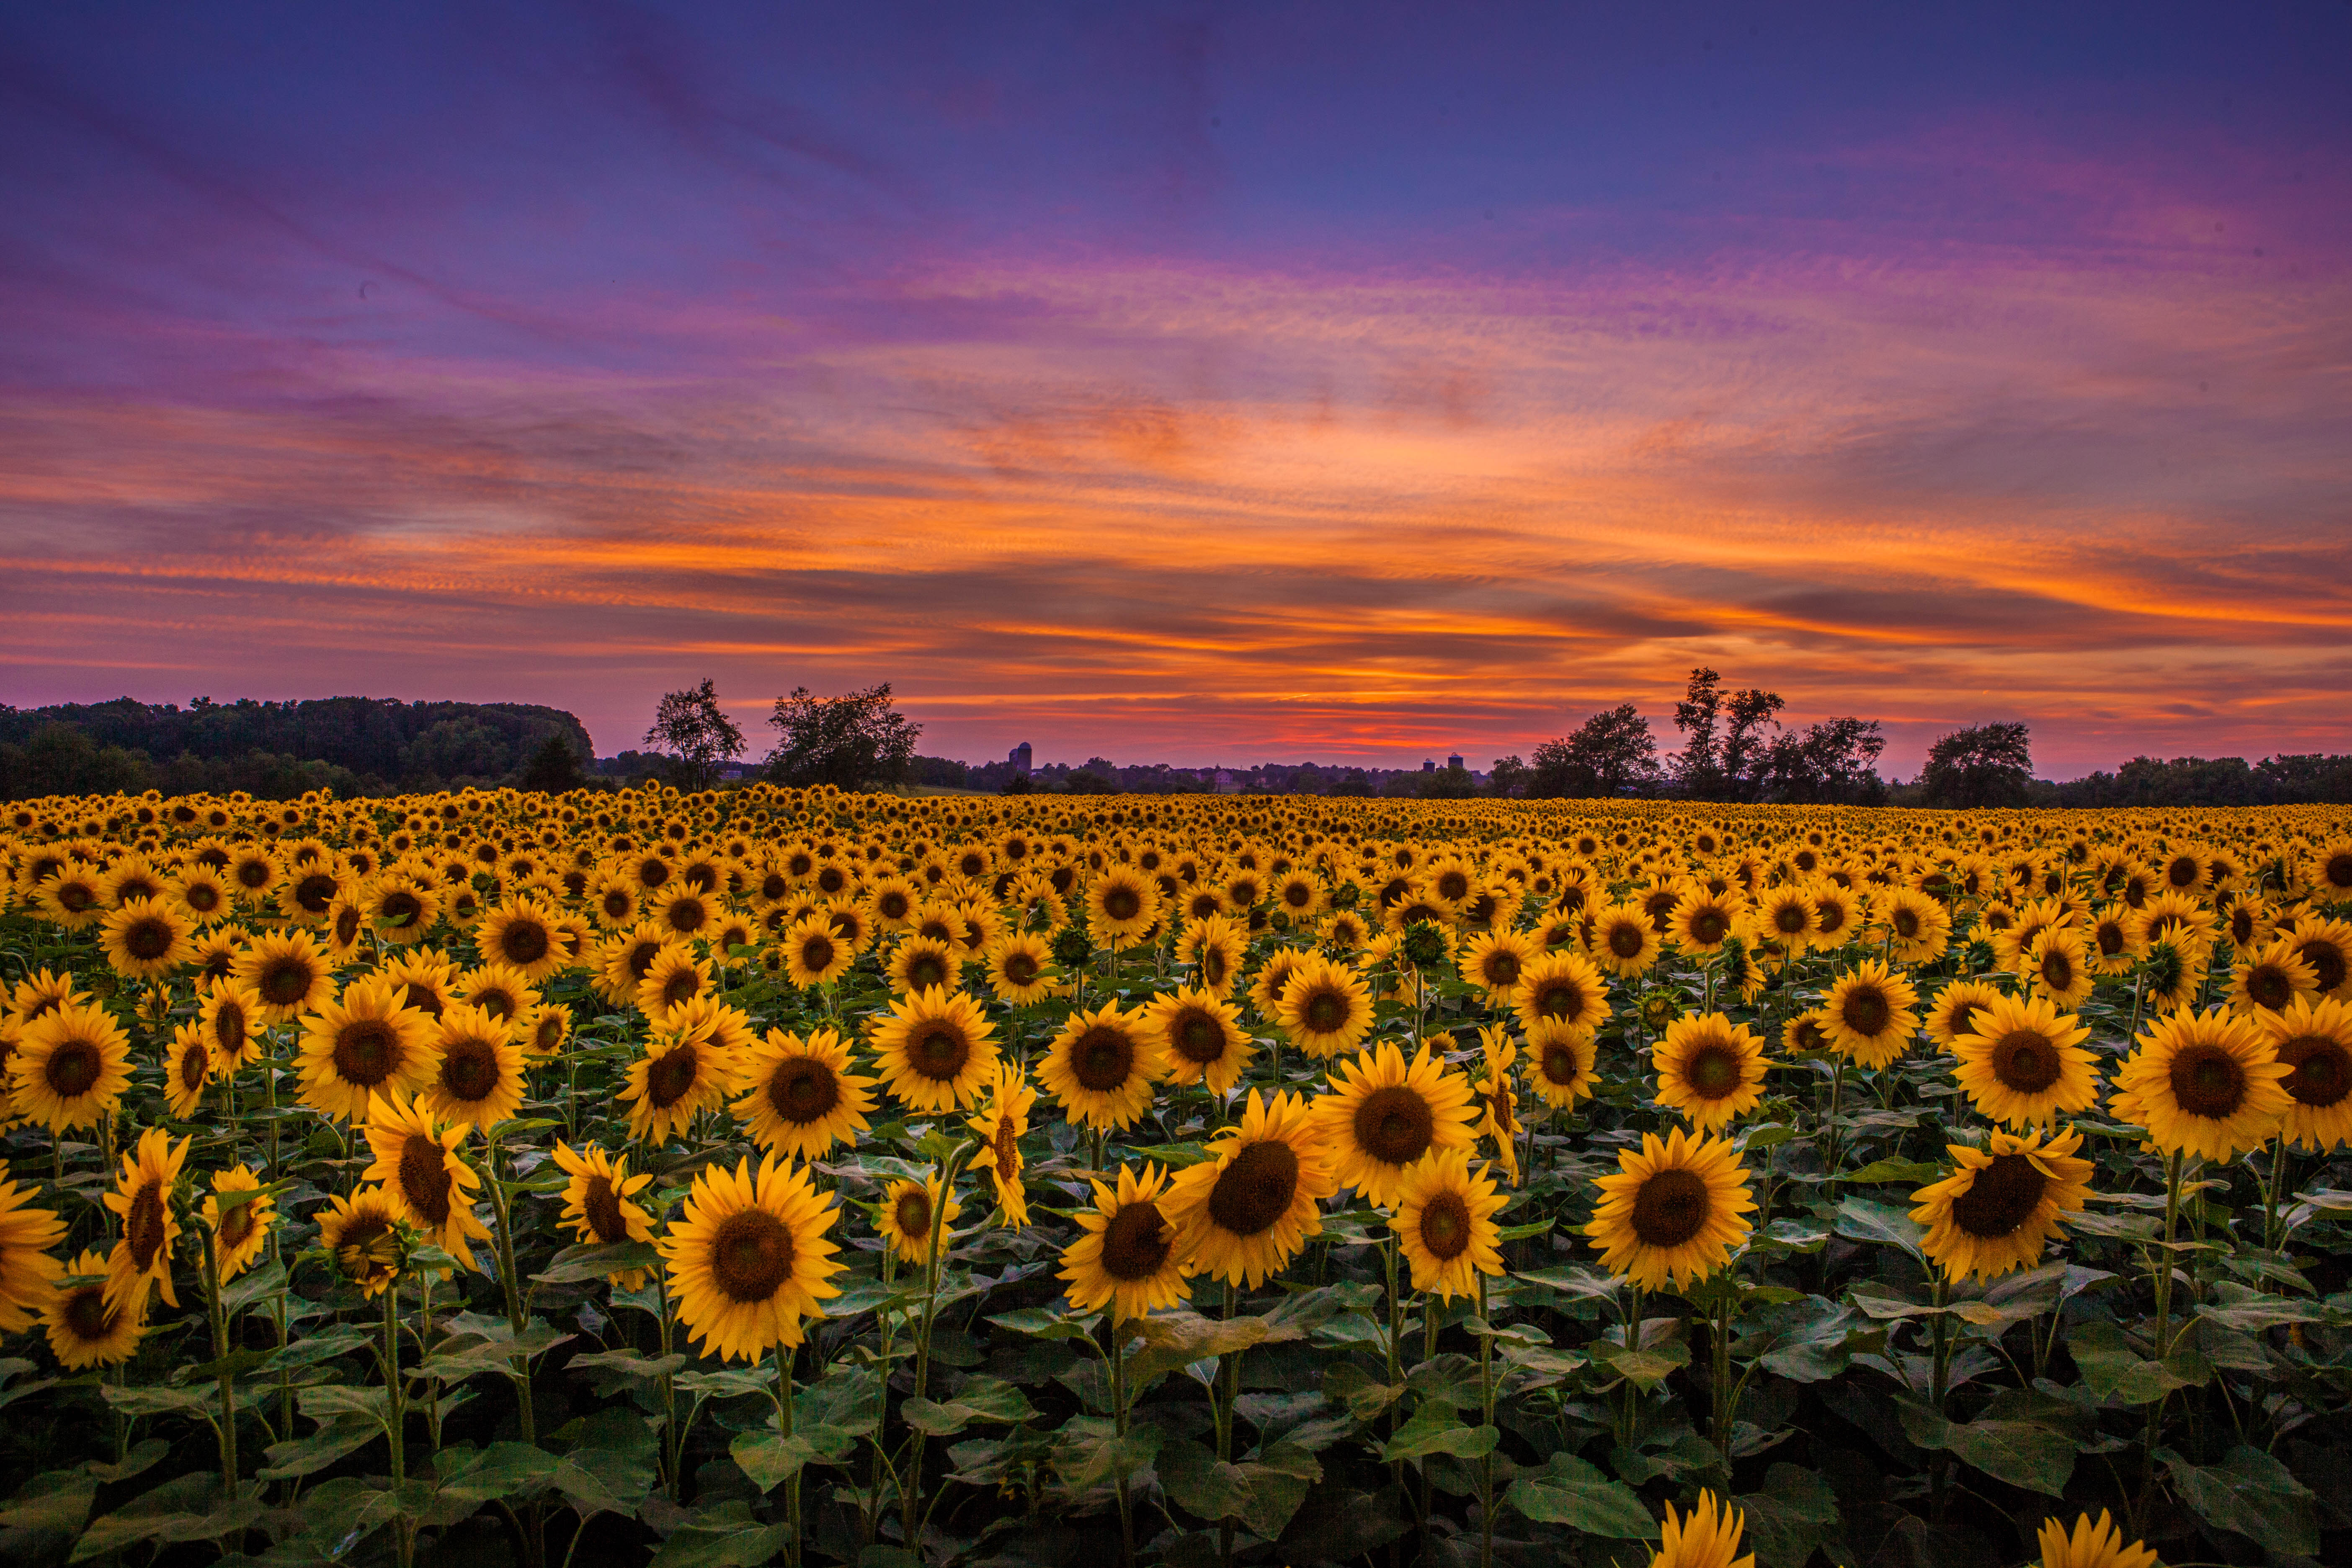 sunflowers, nature, sunset, sky, clouds, field images